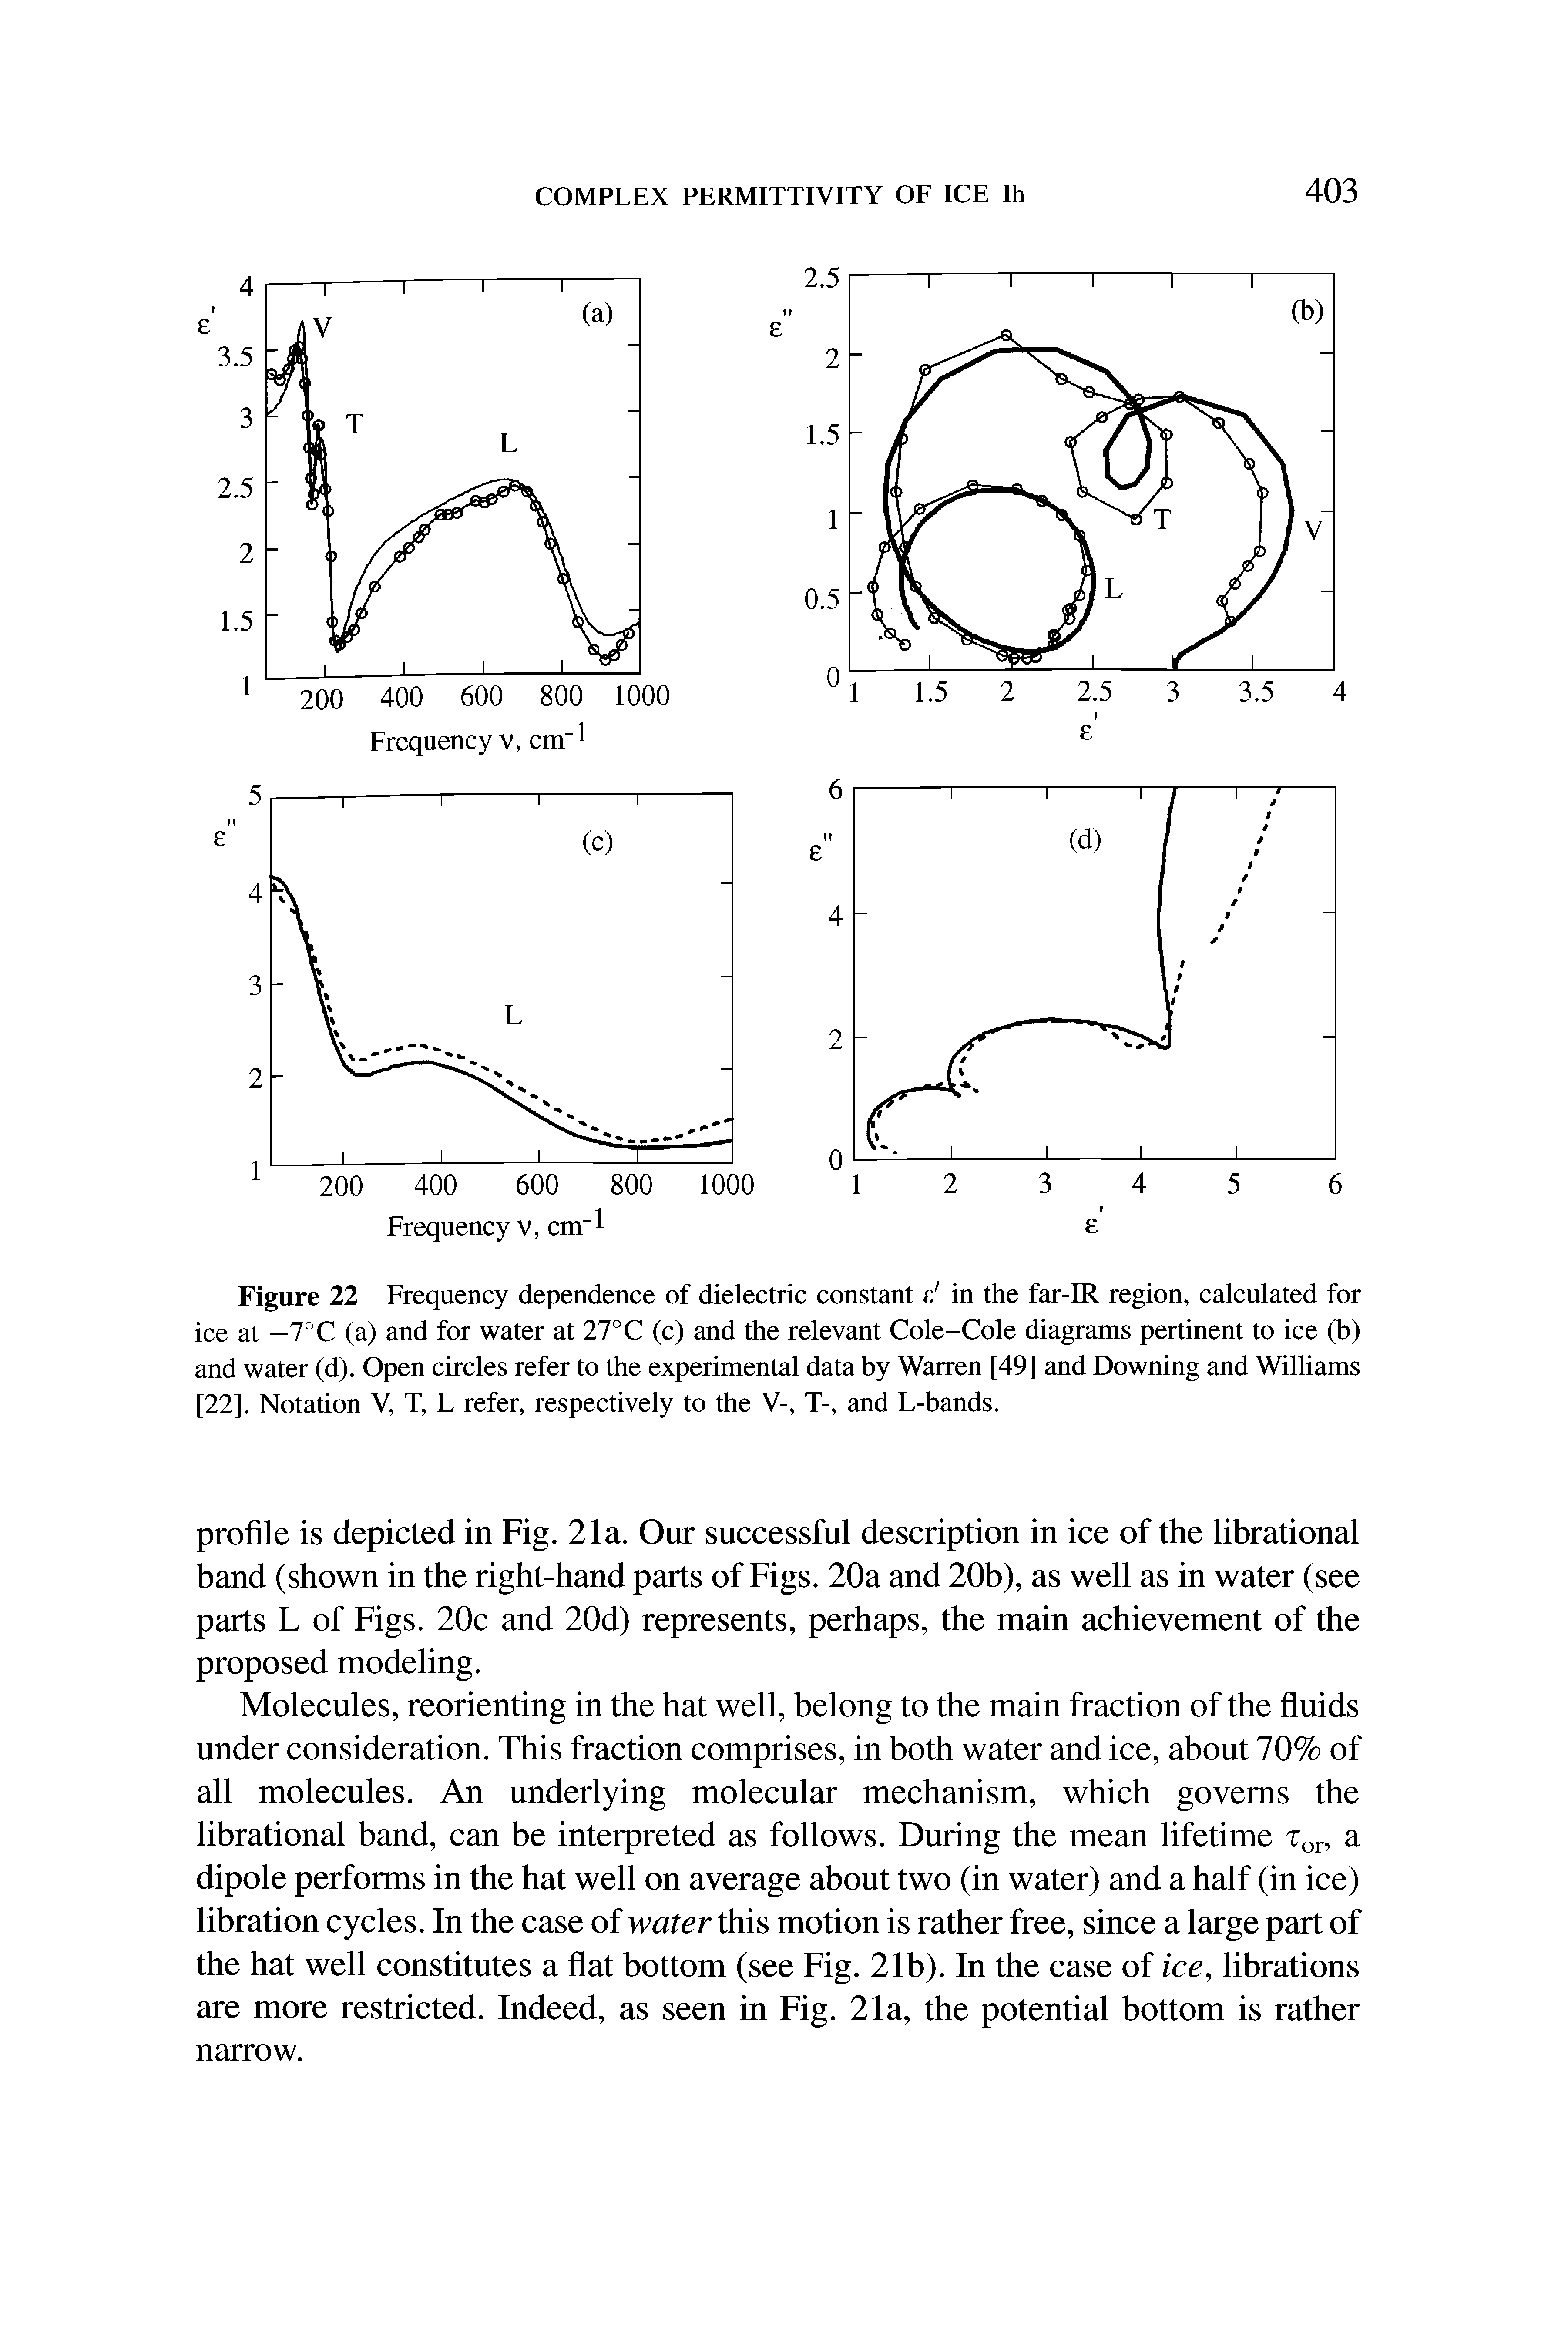 Figure 22 Frequency dependence of dielectric constant e in the far-IR region, calculated for ice at —7°C (a) and for water at 27°C (c) and the relevant Cole-Cole diagrams pertinent to ice (b) and water (d). Open circles refer to the experimental data by Warren [49] and Downing and Williams [22]. Notation V, T, L refer, respectively to the V-, T-, and L-bands.